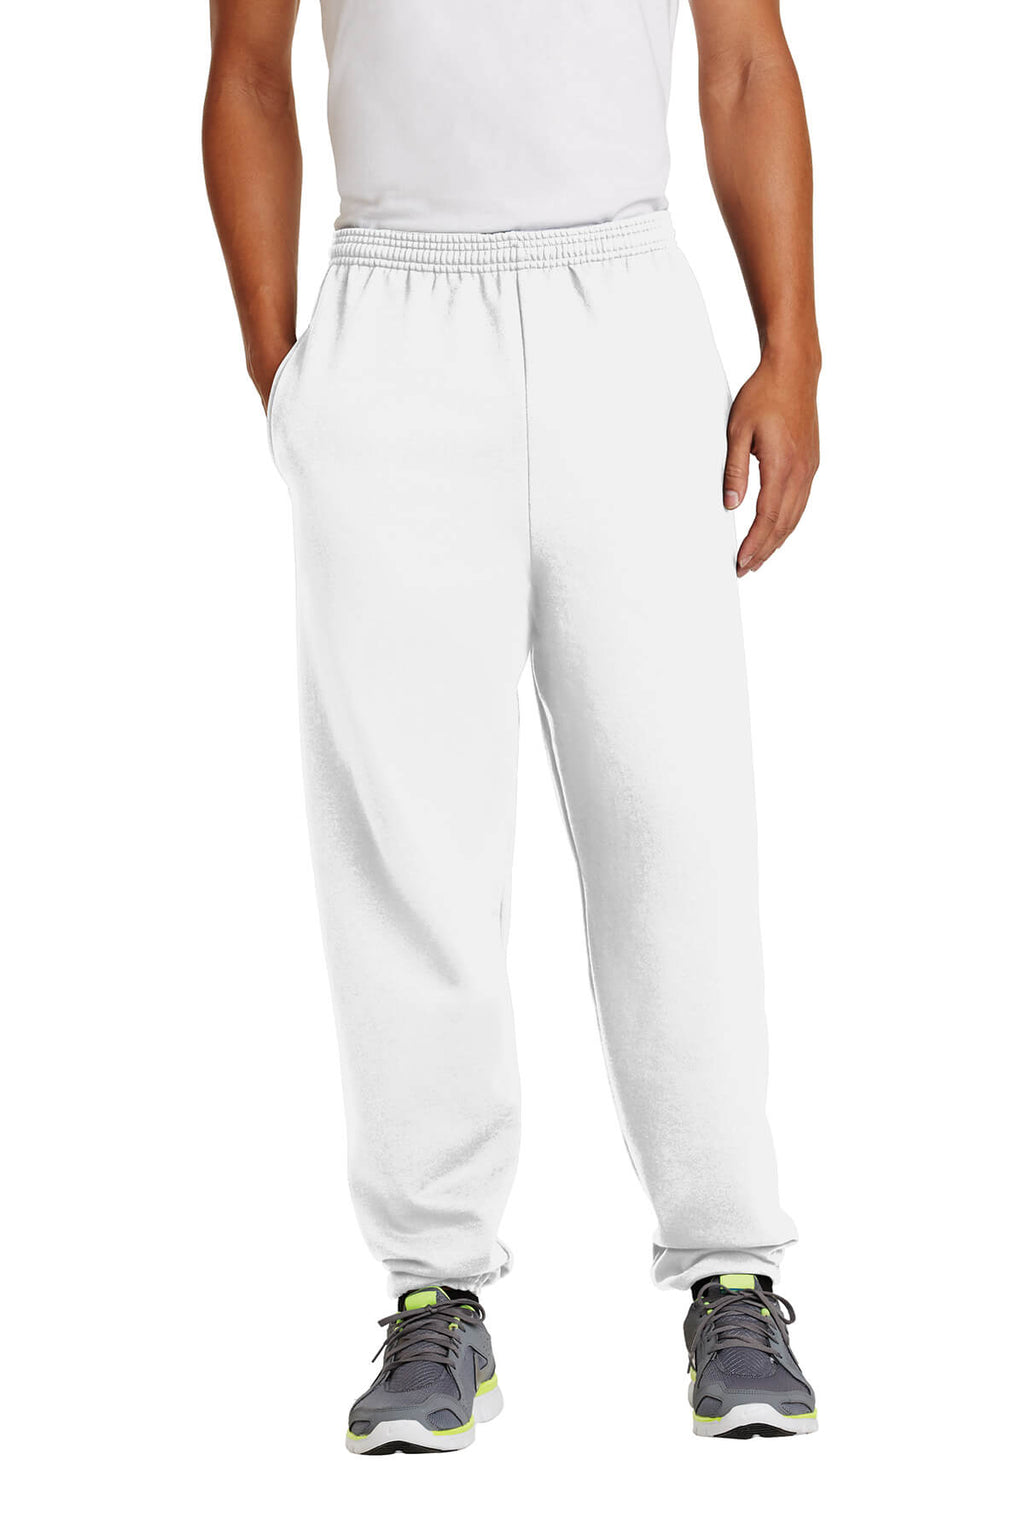 Port & Company Ultimate Sweatpant With Pockets-3